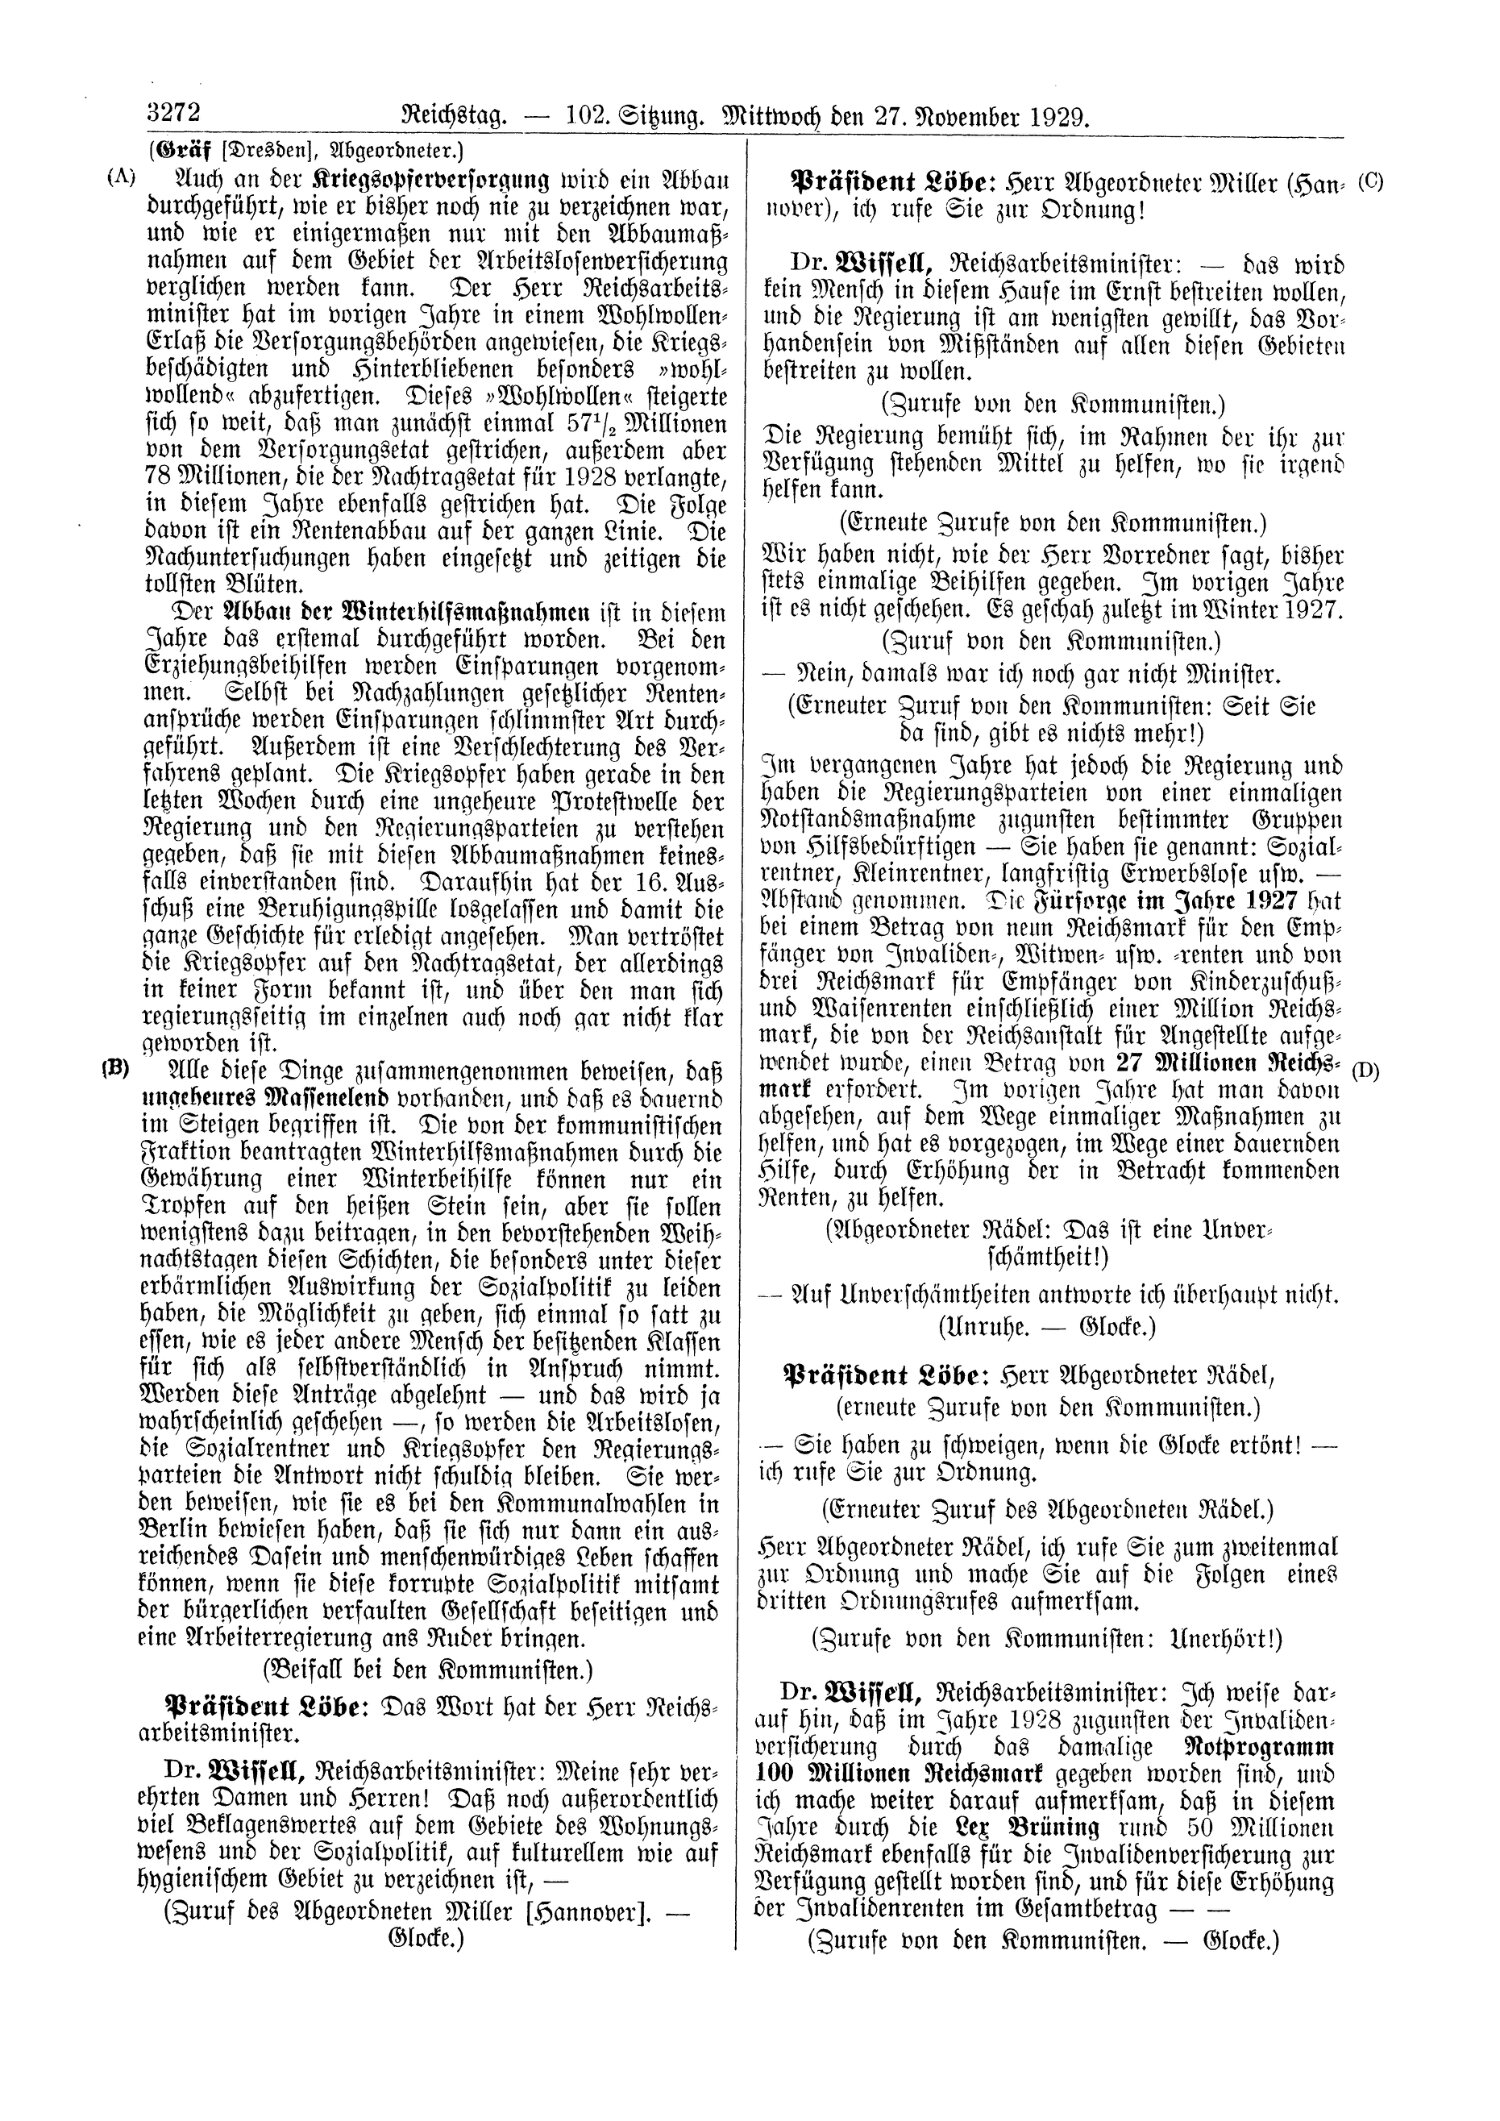 Scan of page 3272